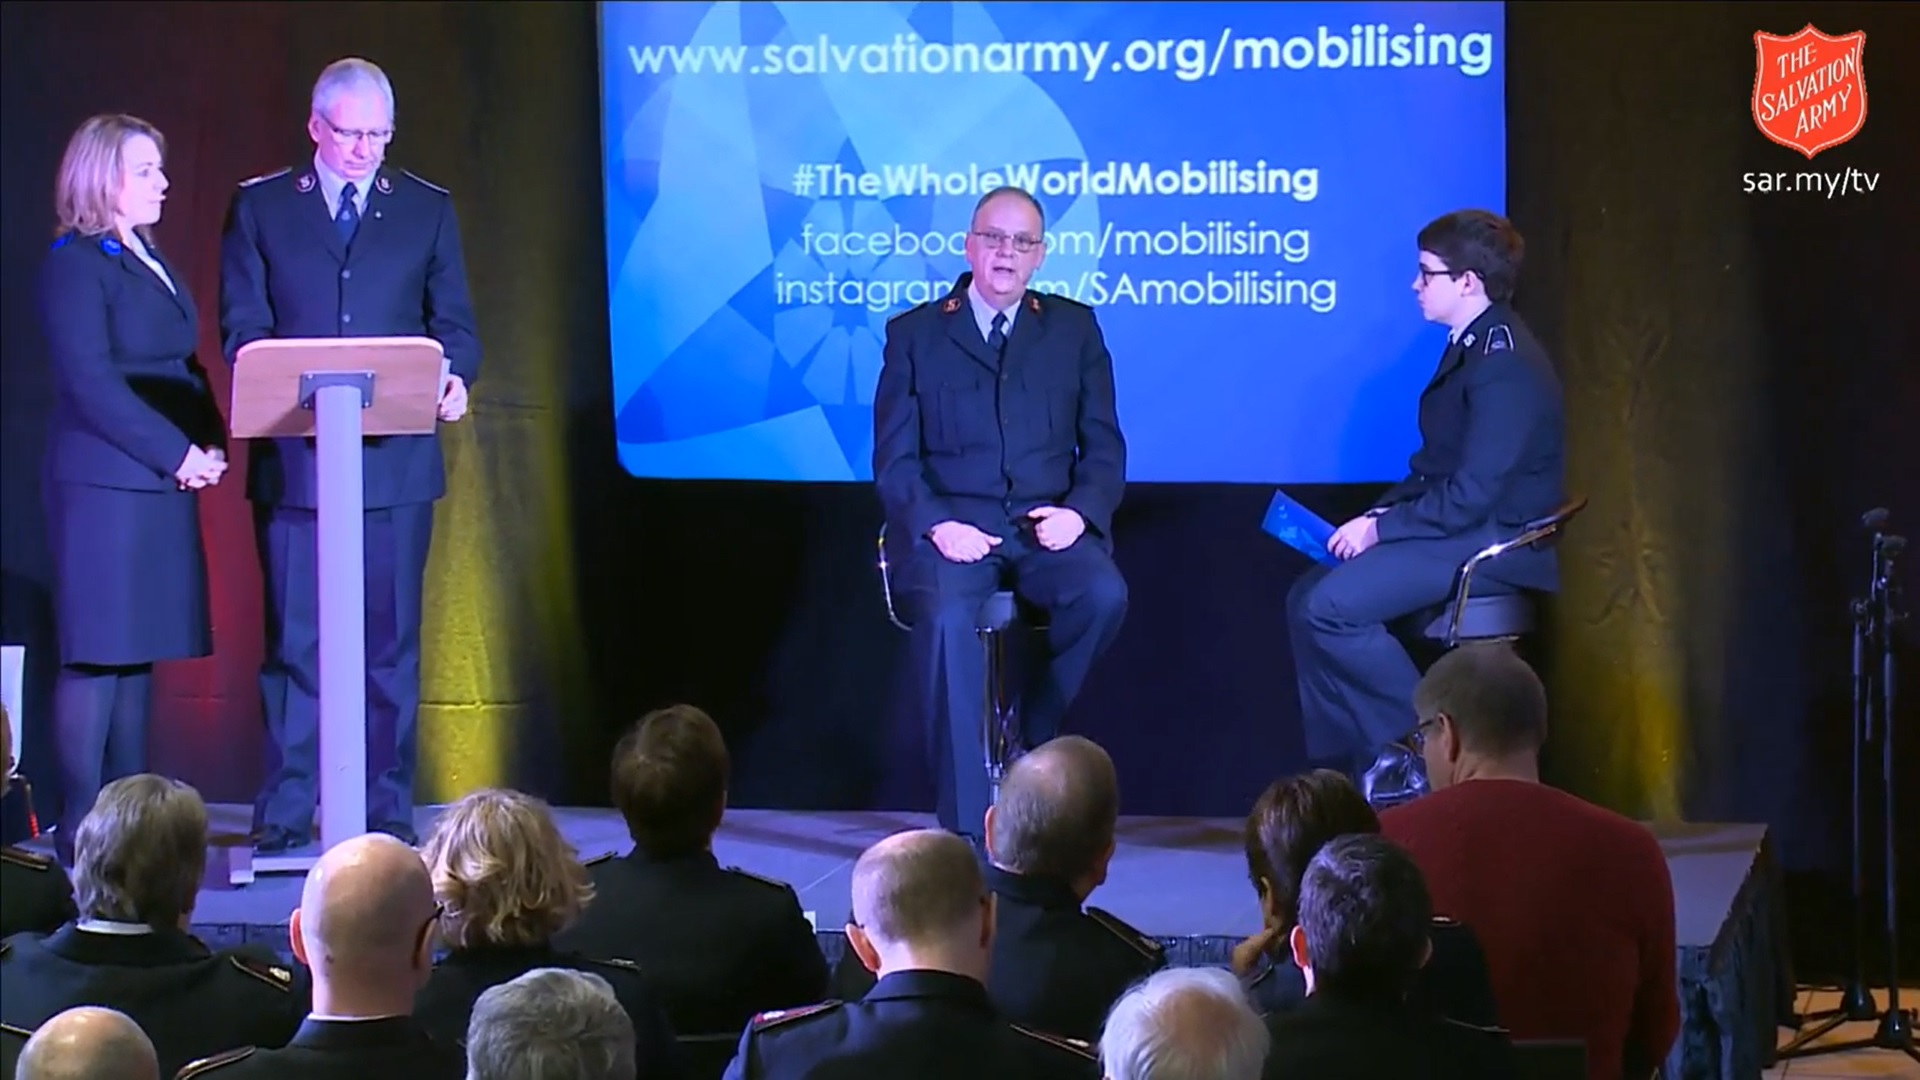 Salvation Army Launches The Whole World Mobilising Initiative